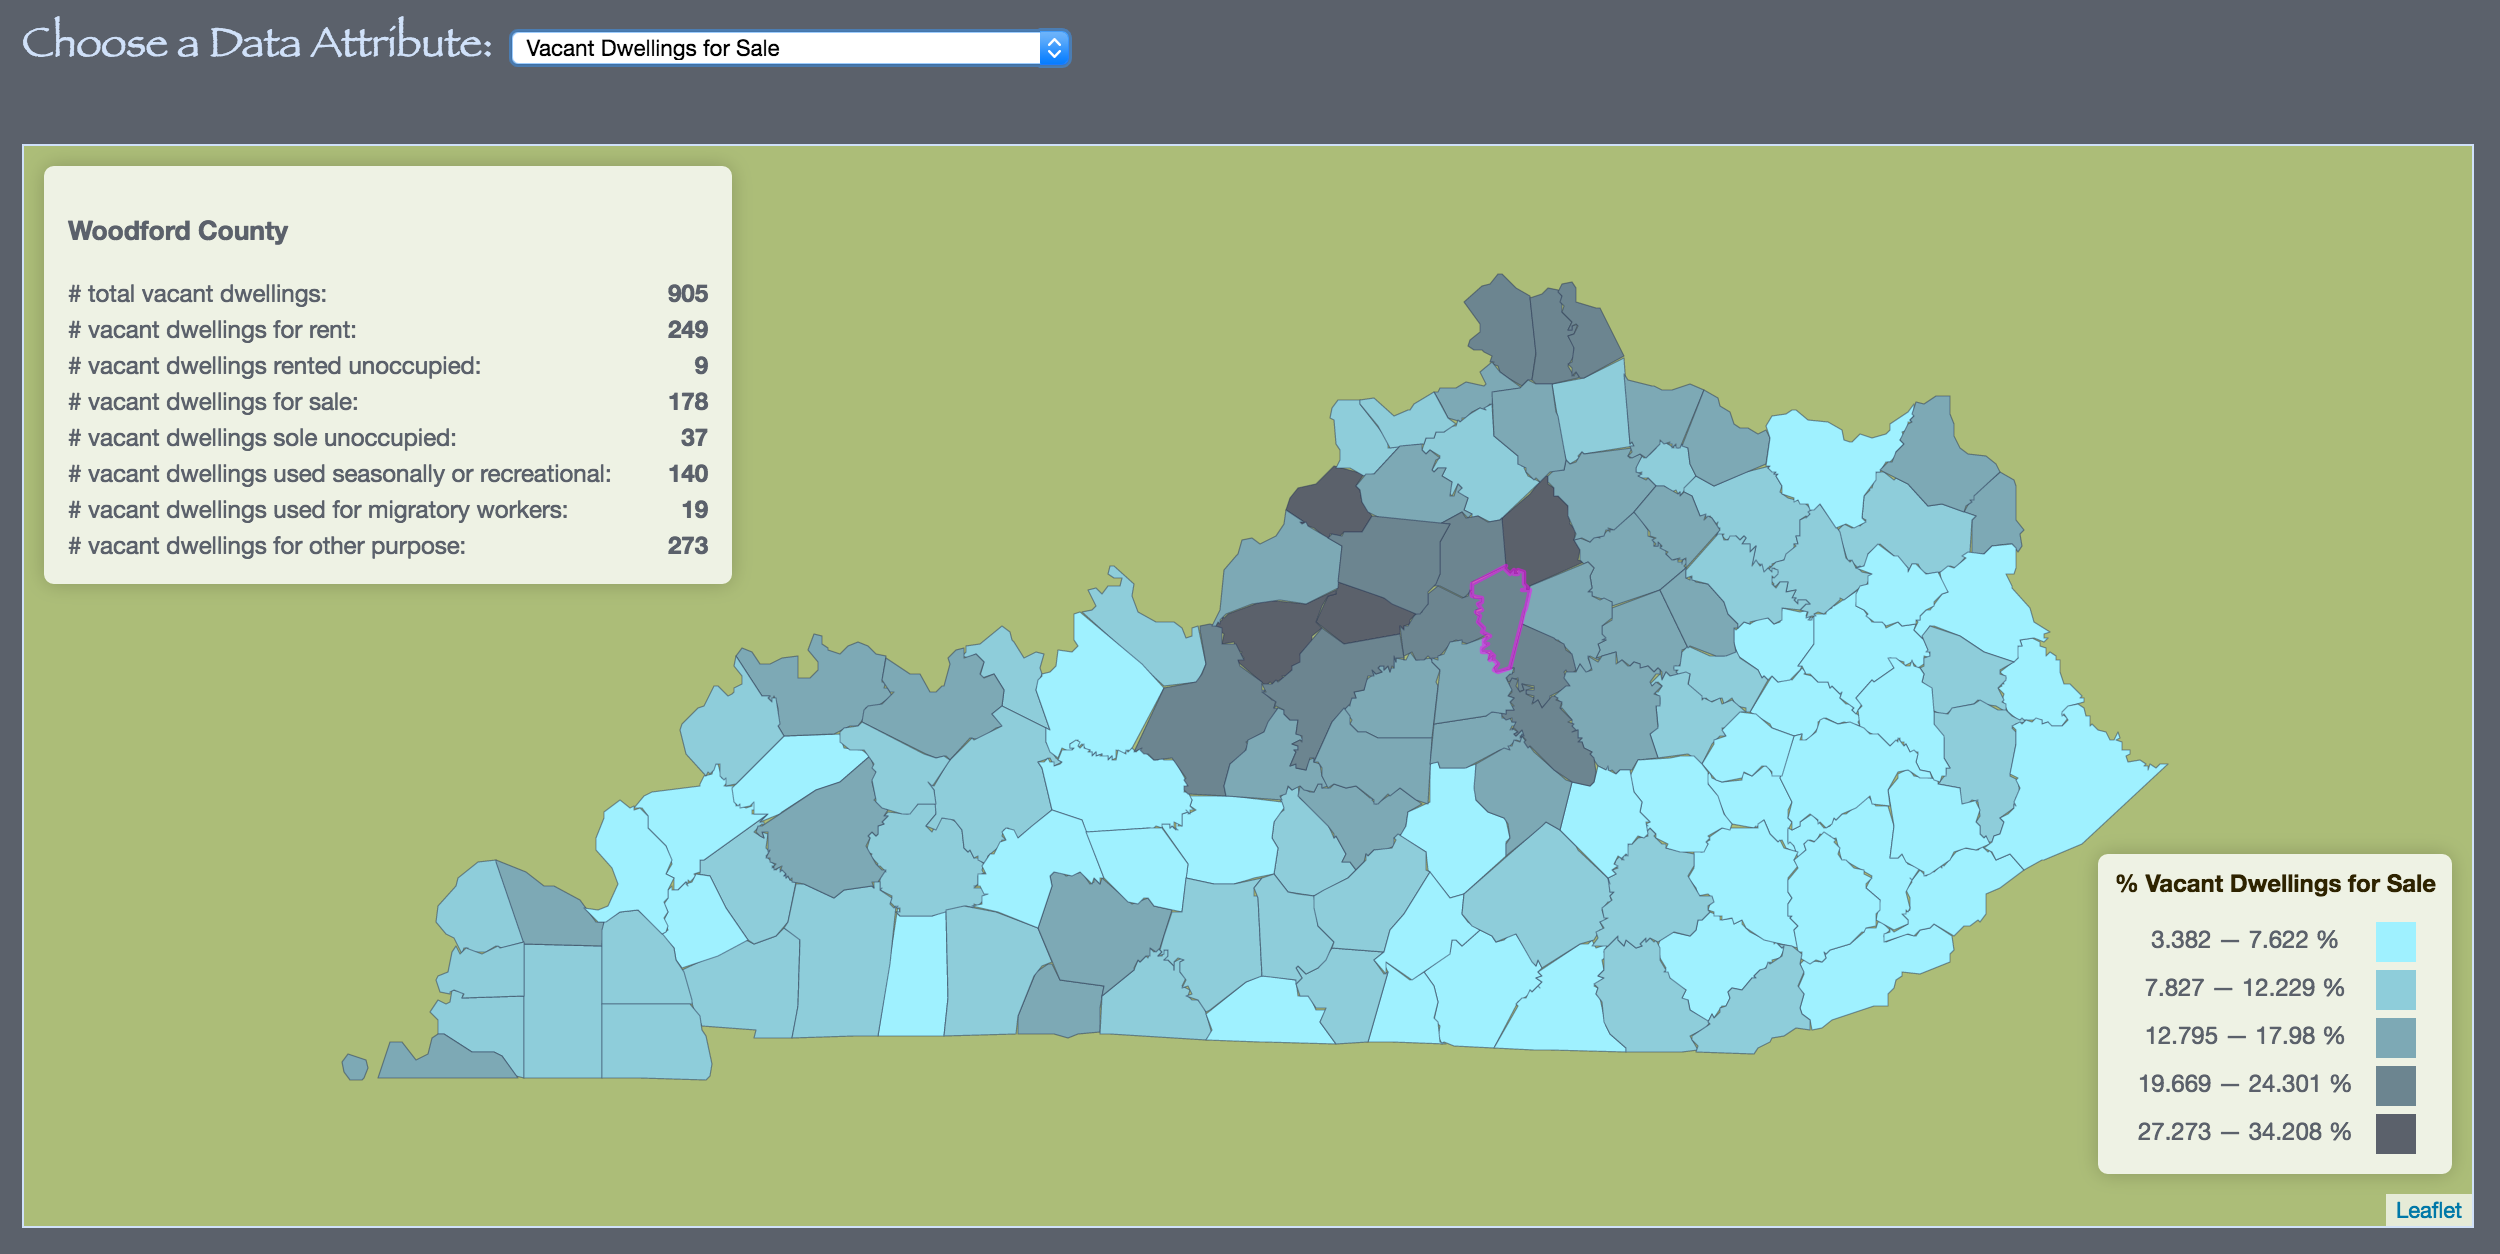 map of vacant dwellings in Kentucky